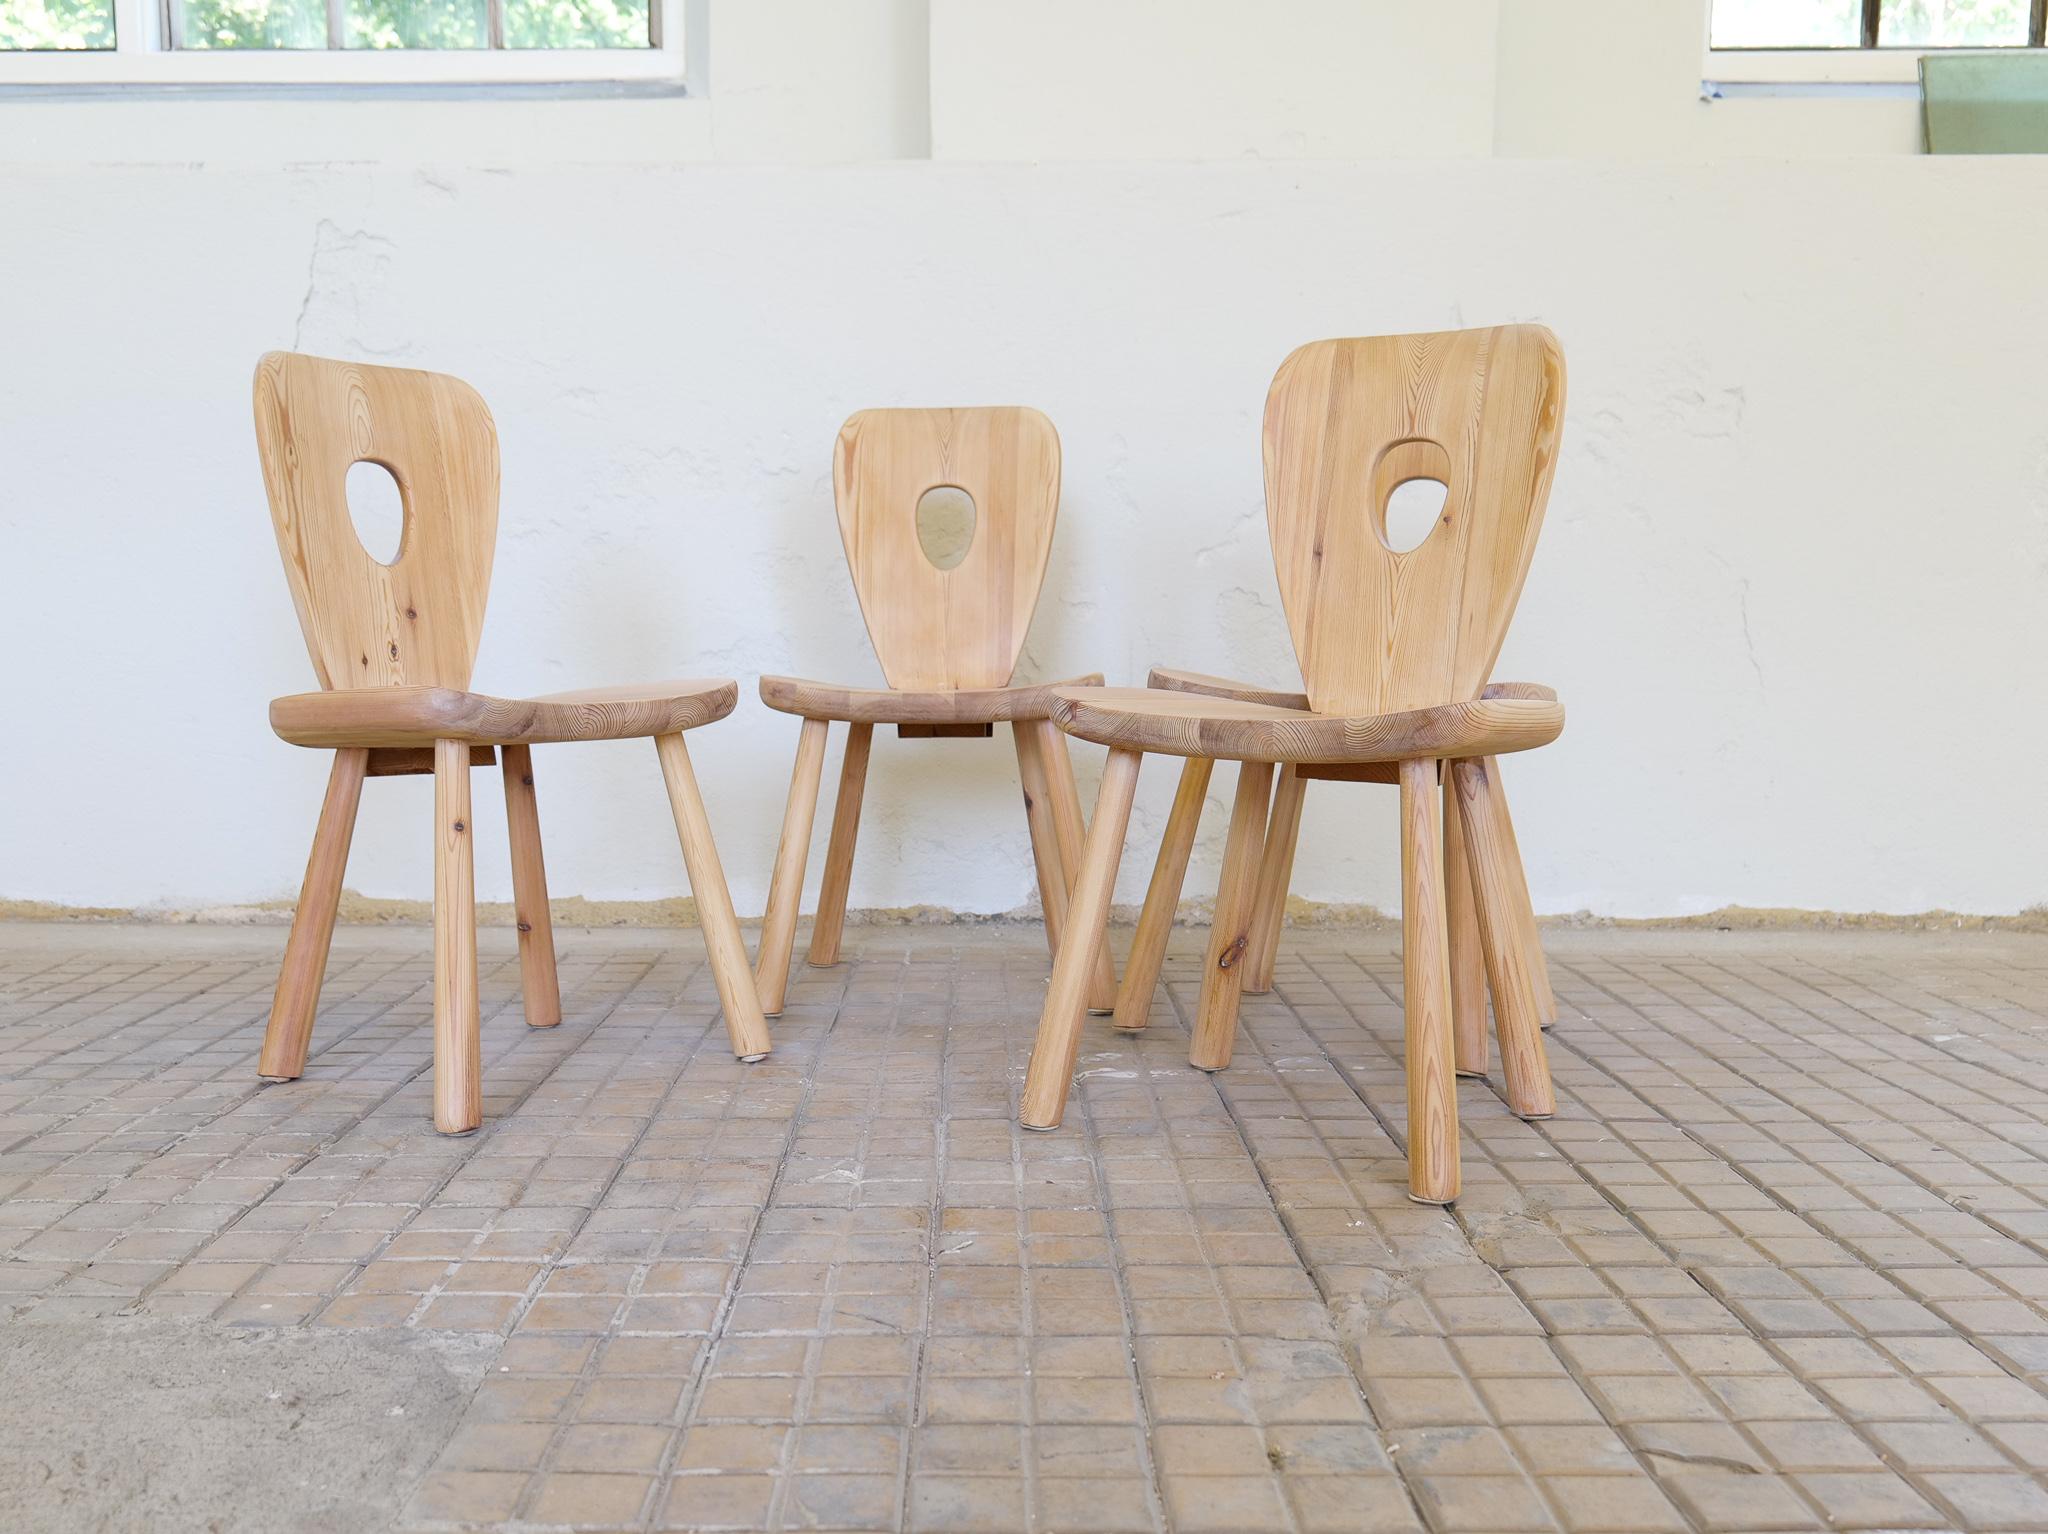 Swedish Sculptural Dining Chairs in Pine Bo Fjaestad, Sweden 1930s For Sale 14